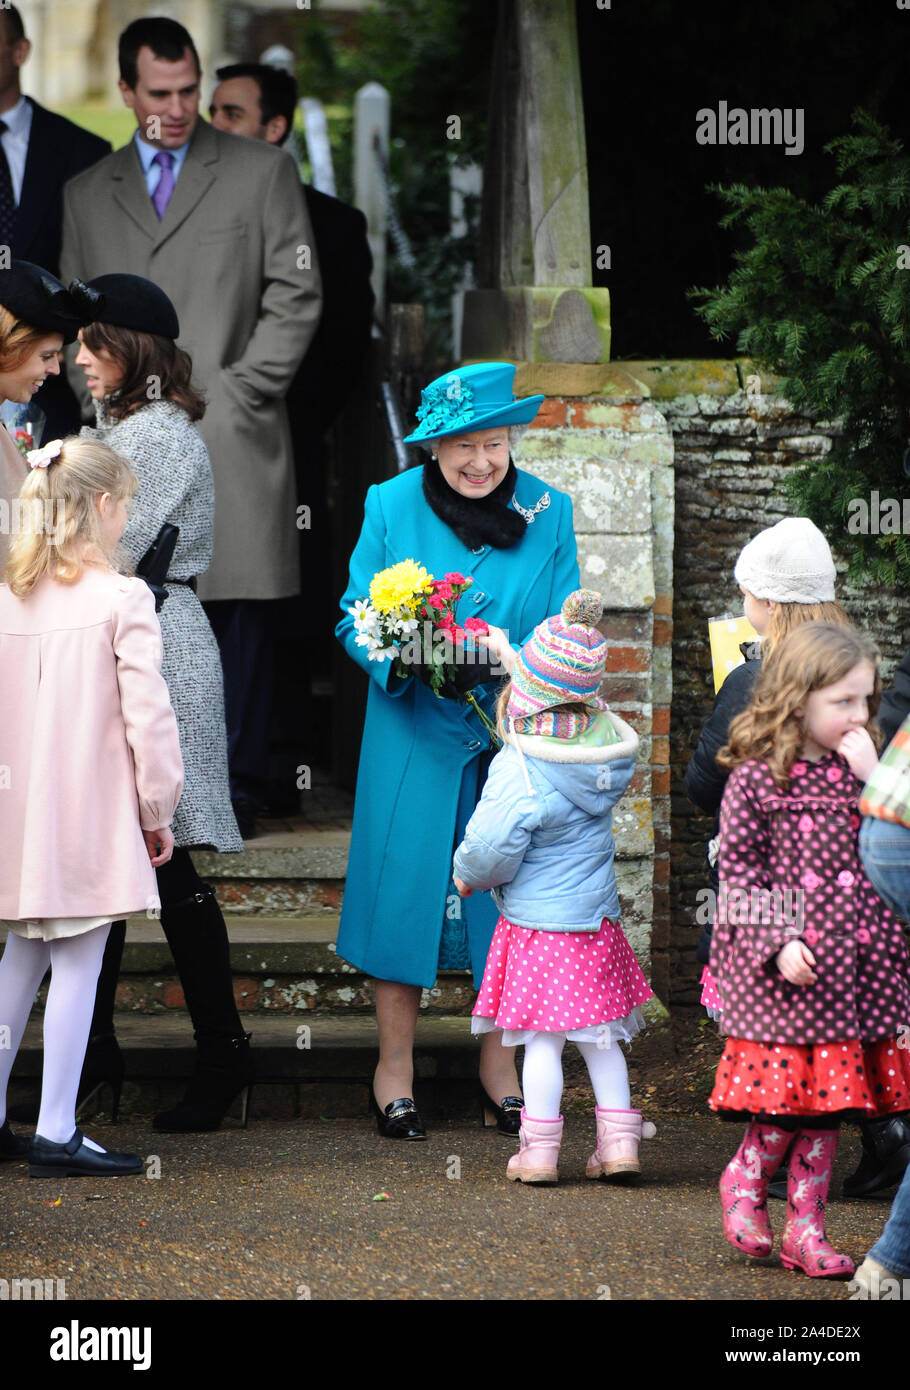 Photo Must Be Credited ©Kate Green/Alpha Press 076785 25/12/12 Princess Eugenie, Princess Beatrice, Lady Louise Windsor, Peter Phillips with Queen Elizabeth II at St Mary Magdalene Church in Sandringham, Norfolk for a Christmas Day Service with the Royal Family Stock Photo